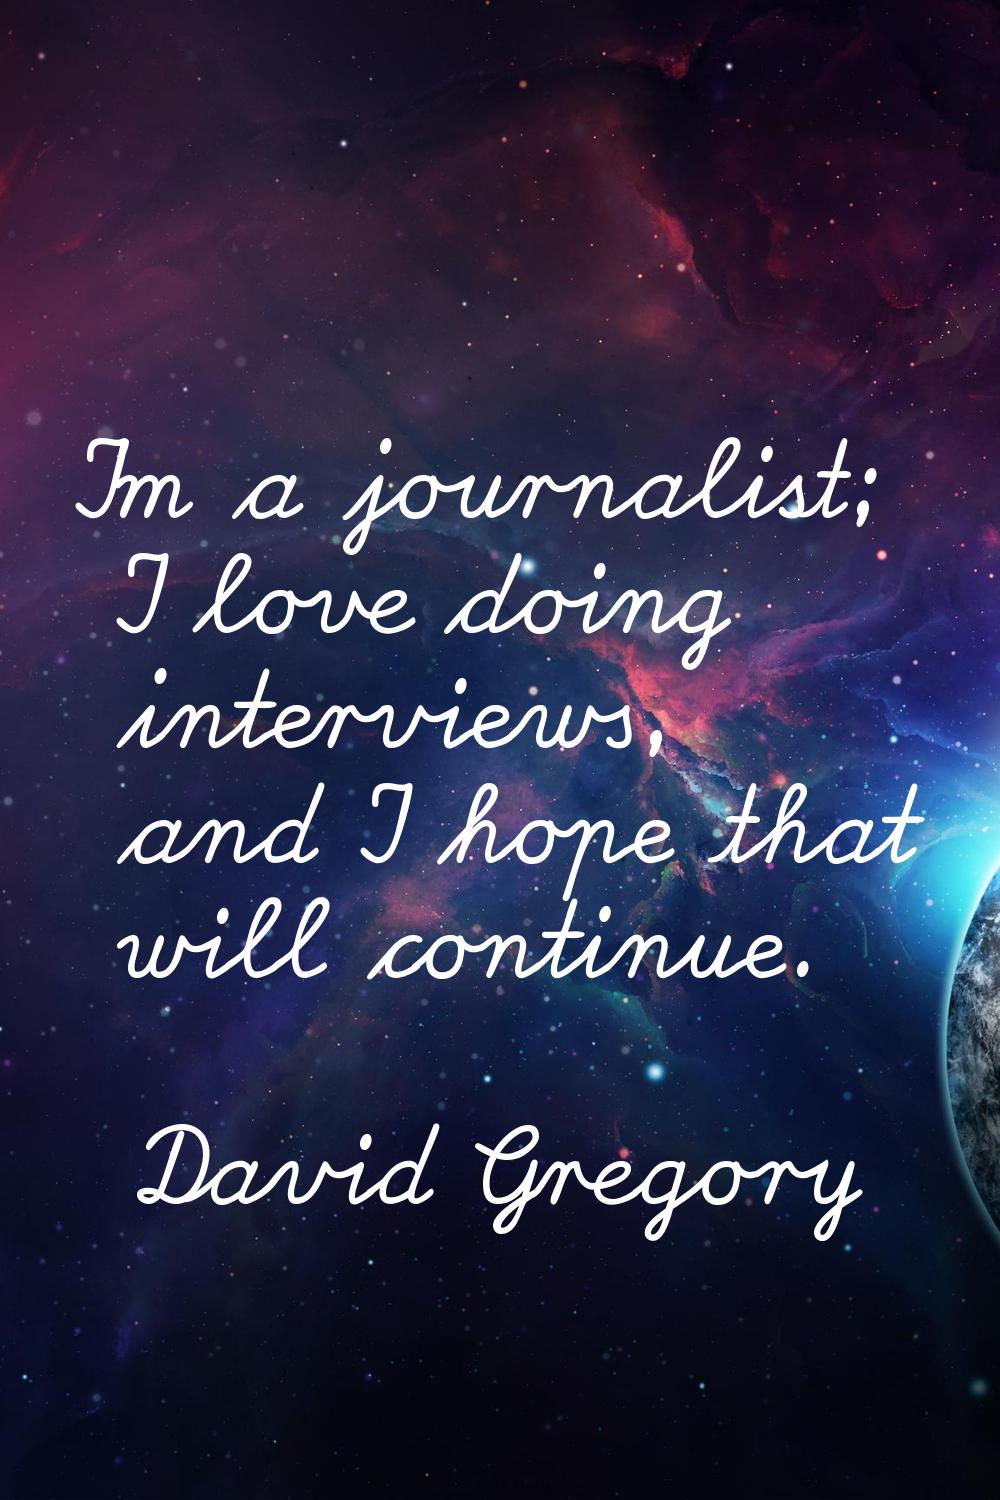 I'm a journalist; I love doing interviews, and I hope that will continue.